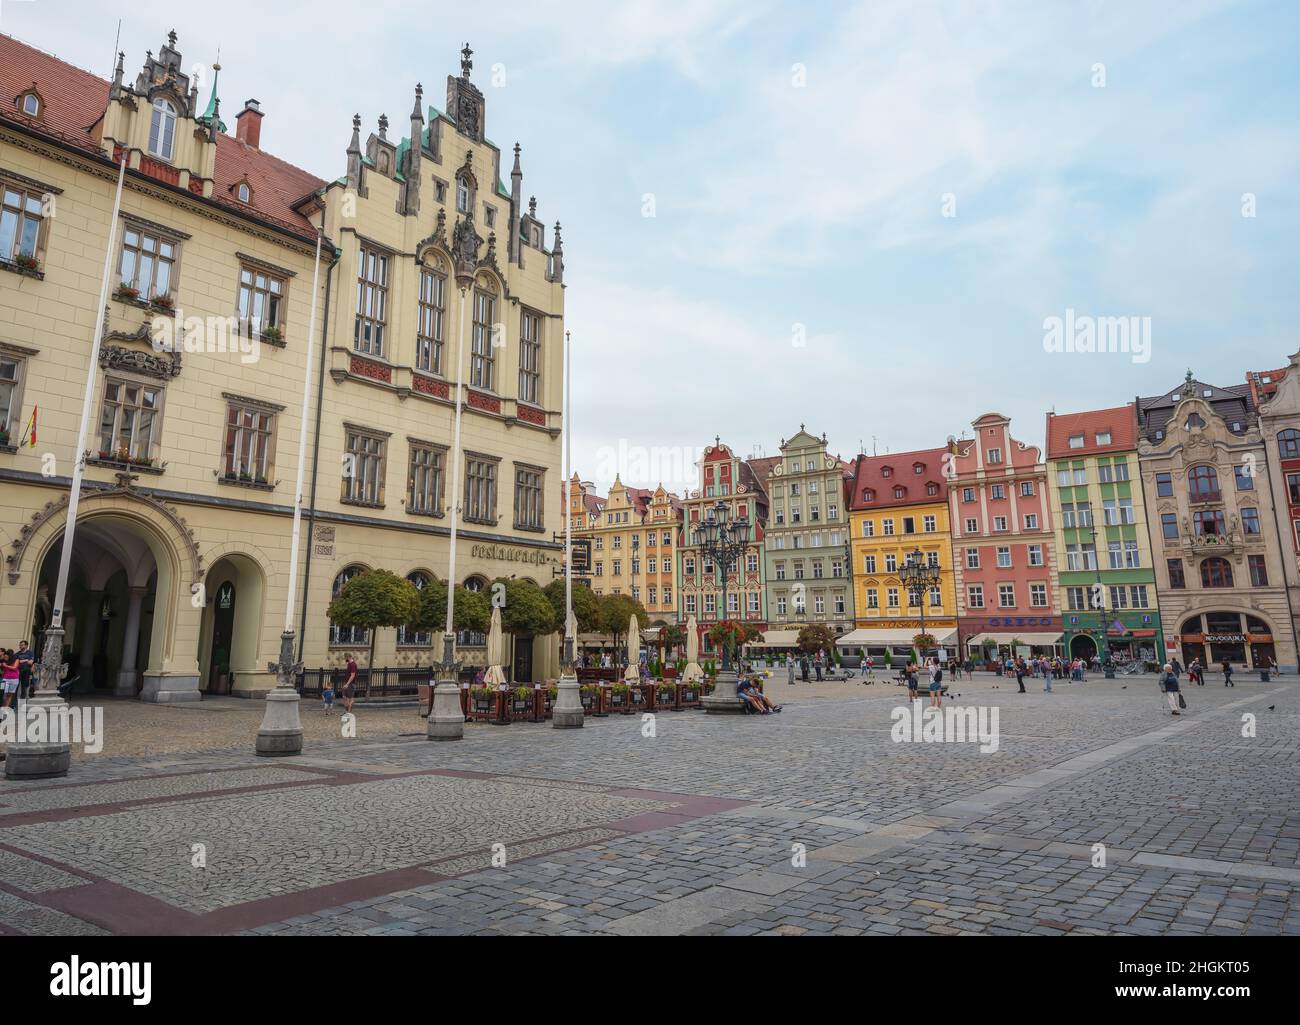 New Town Hall at Market Square - Wroclaw, Poland Stock Photo